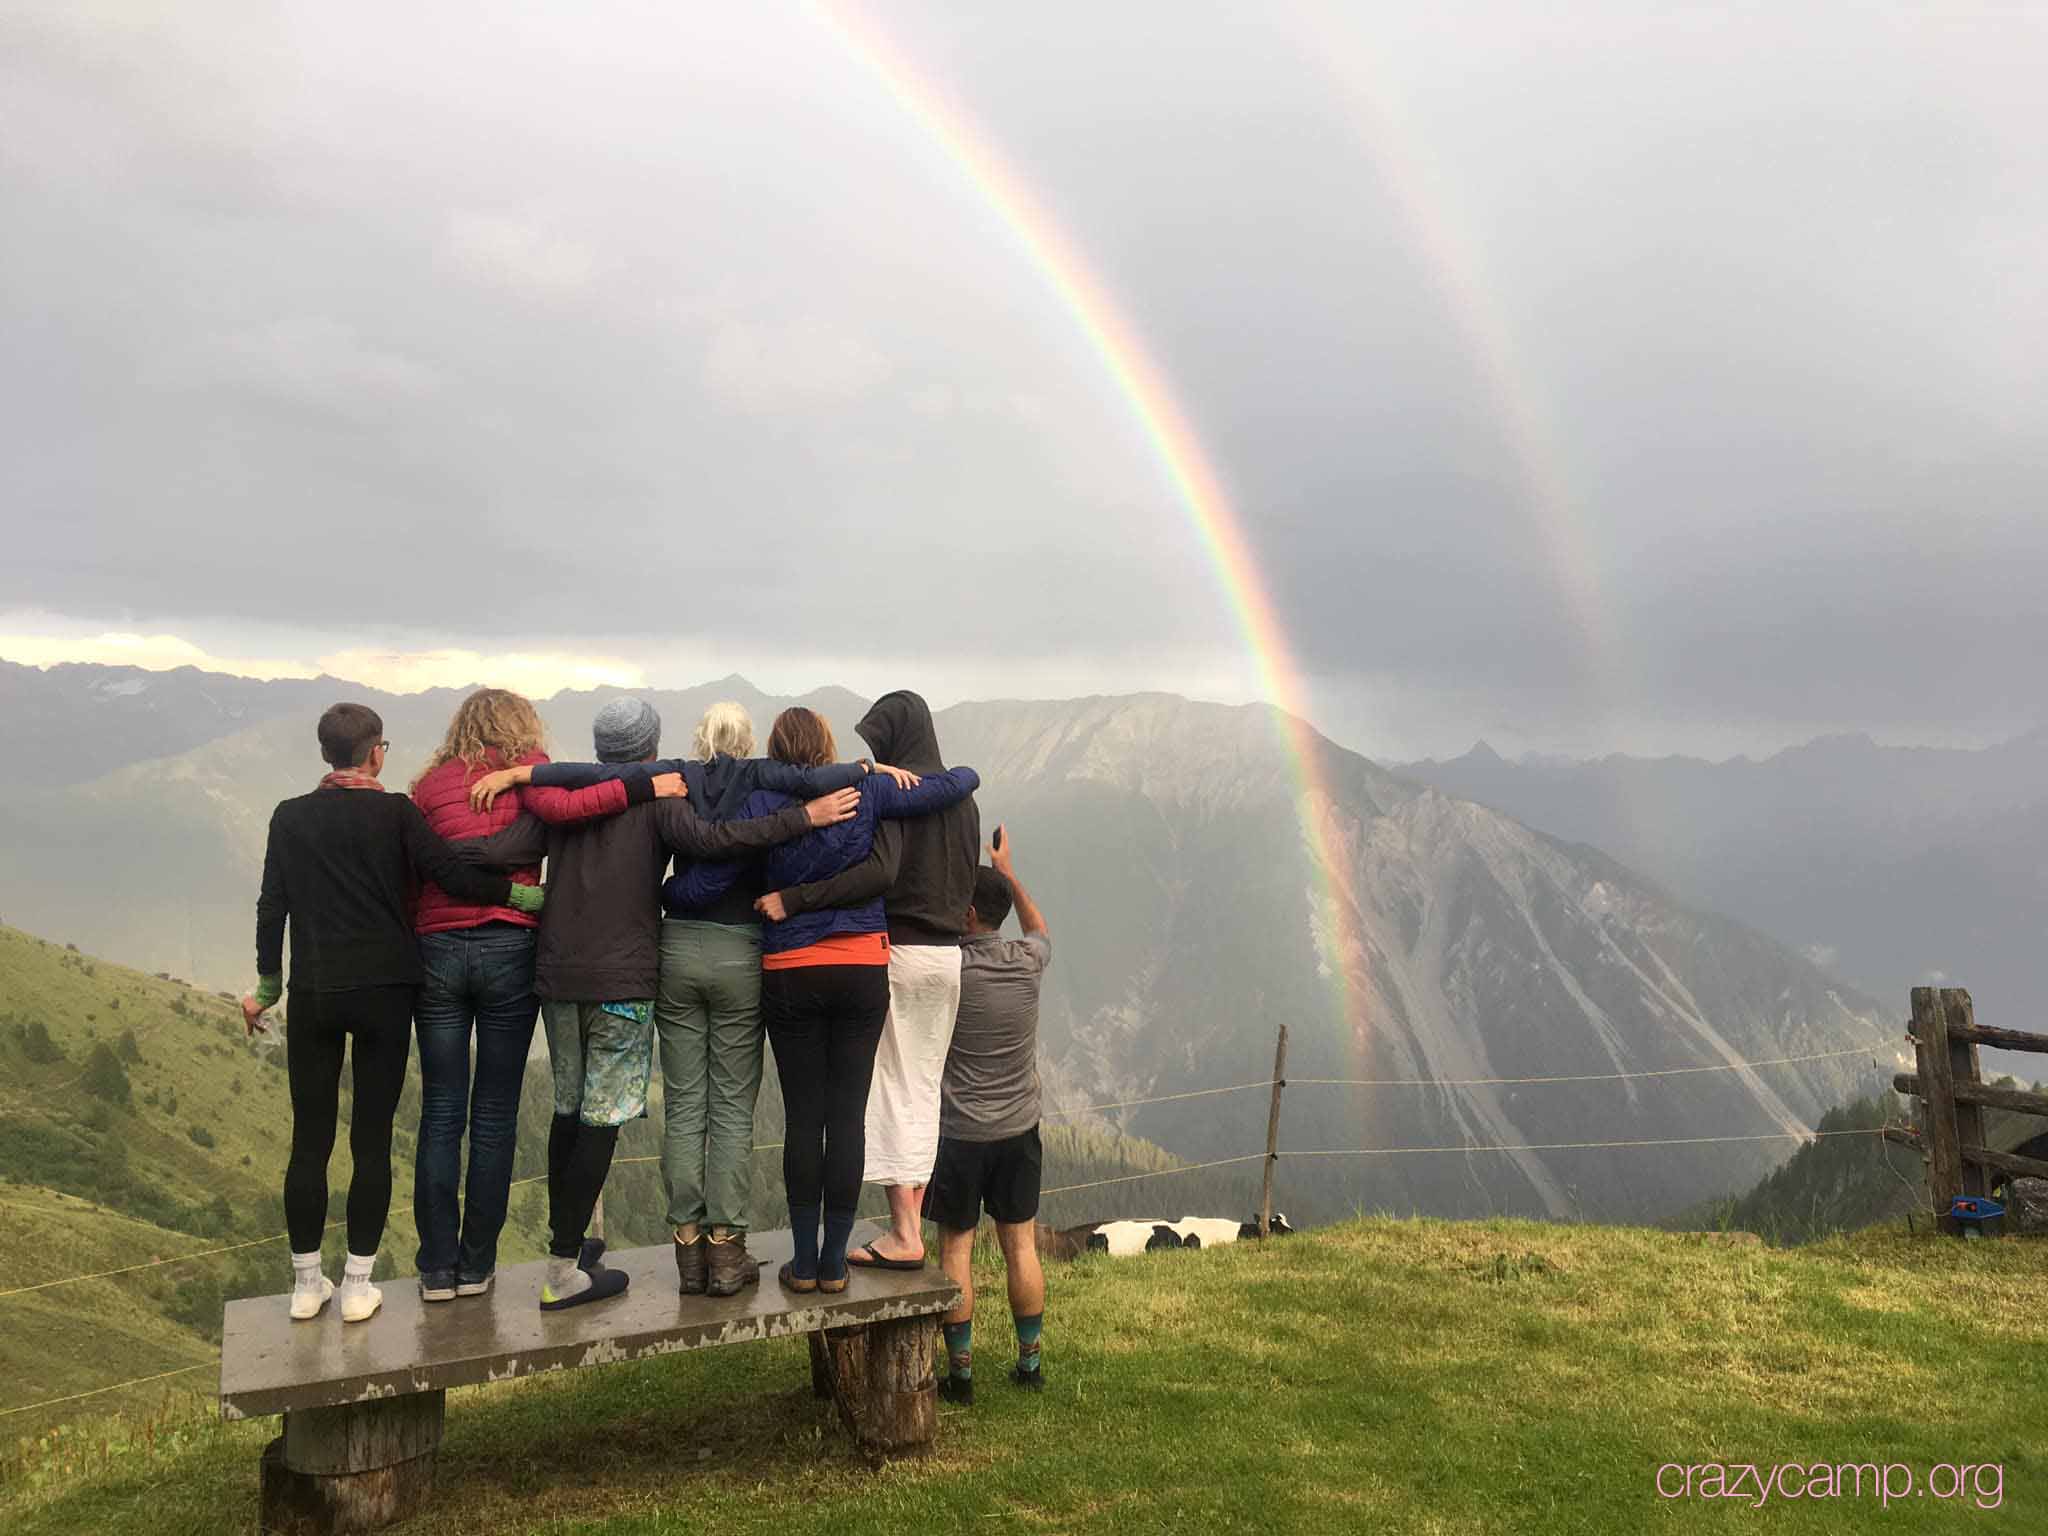 Crazy Campers watching the double rainbow in front of the hut